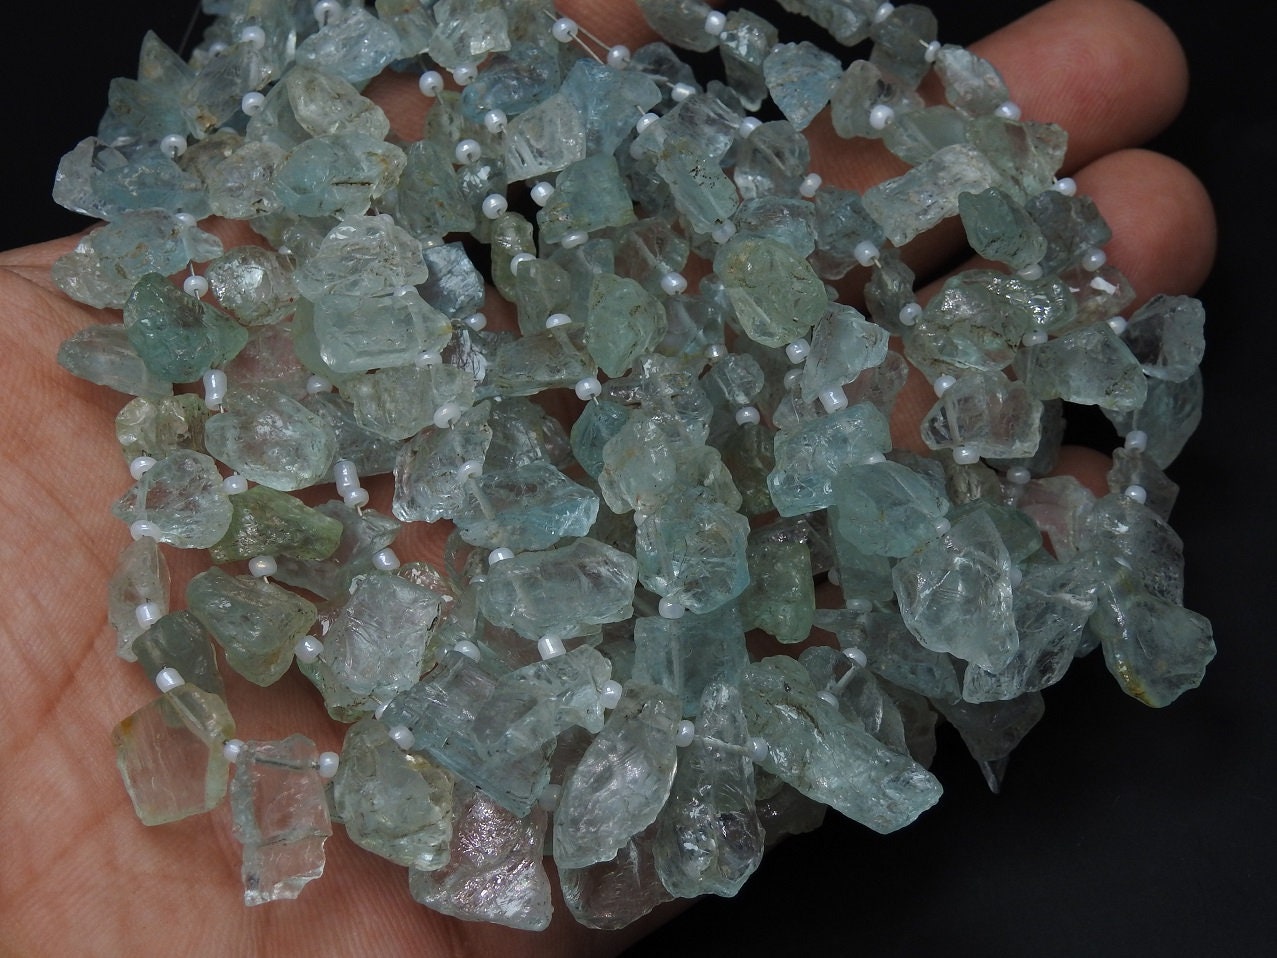 Aquamarine Natural Rough,Uncut,Anklet,Chip,Chunks,Stick,Slab,Nuggets,Loose Raw Bead 9Inch 20X14To11X9MM Approx Wholesaler,Supplies RB1 | Save 33% - Rajasthan Living 13